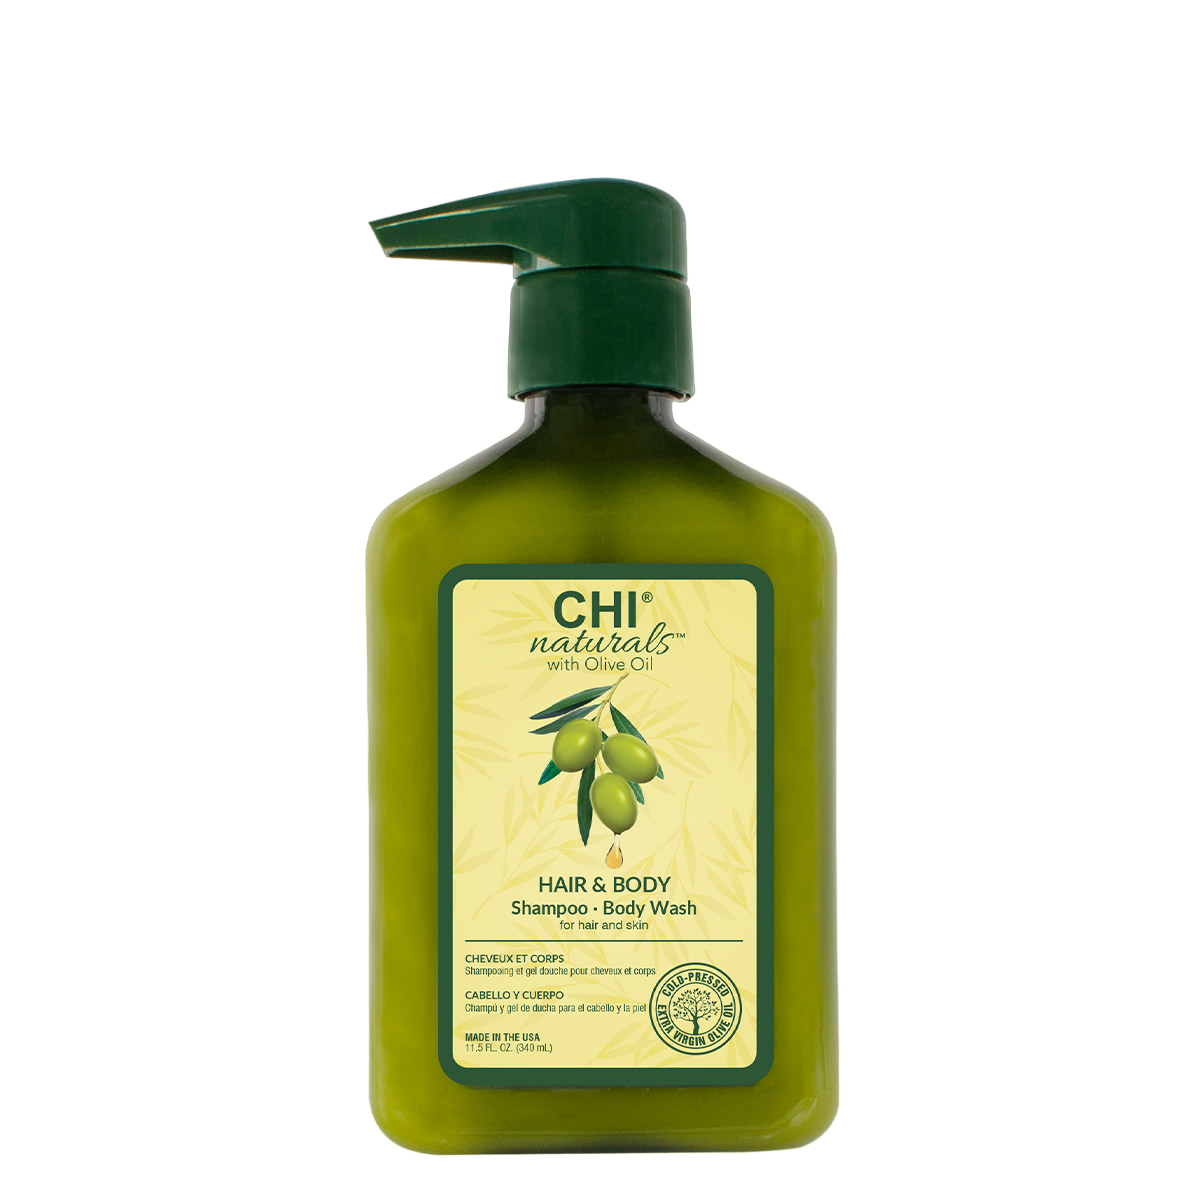 CHI Naturals with Olive Oil Hair and Body Shampoo Wash, 340ml